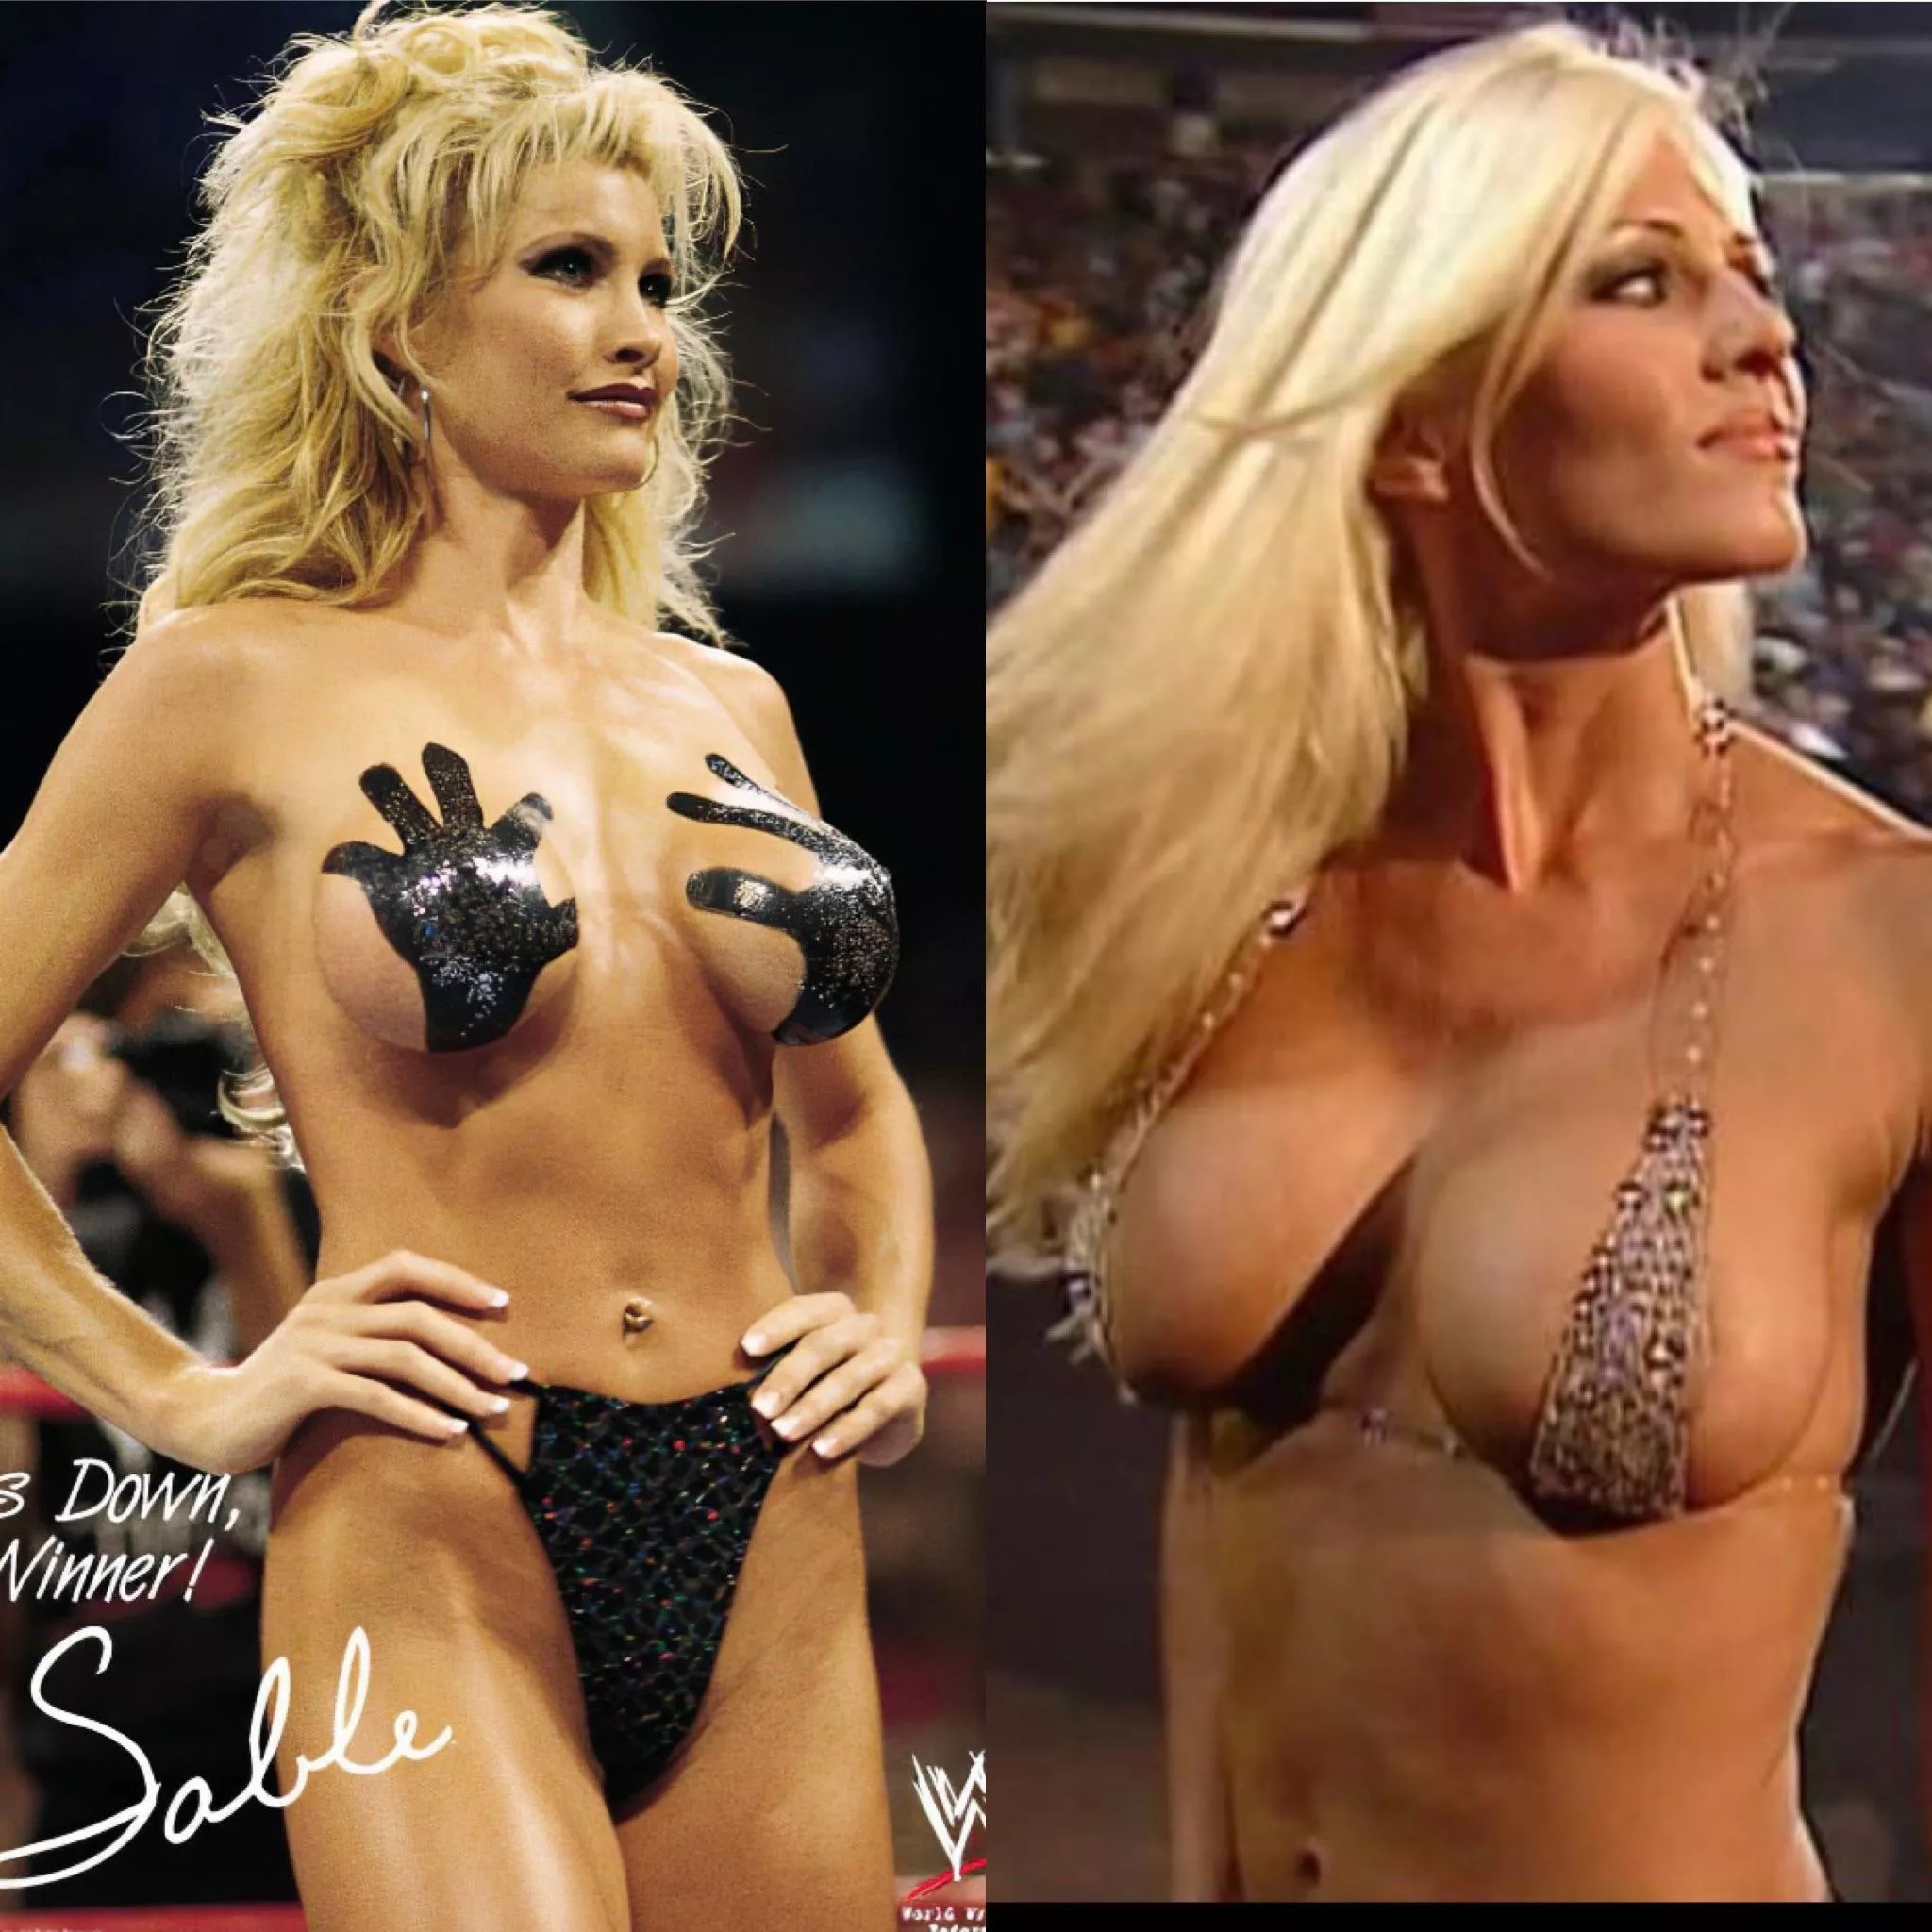 Torrie vs sable top shelf was an all time debate nudes in WrestleFap Onlynudes